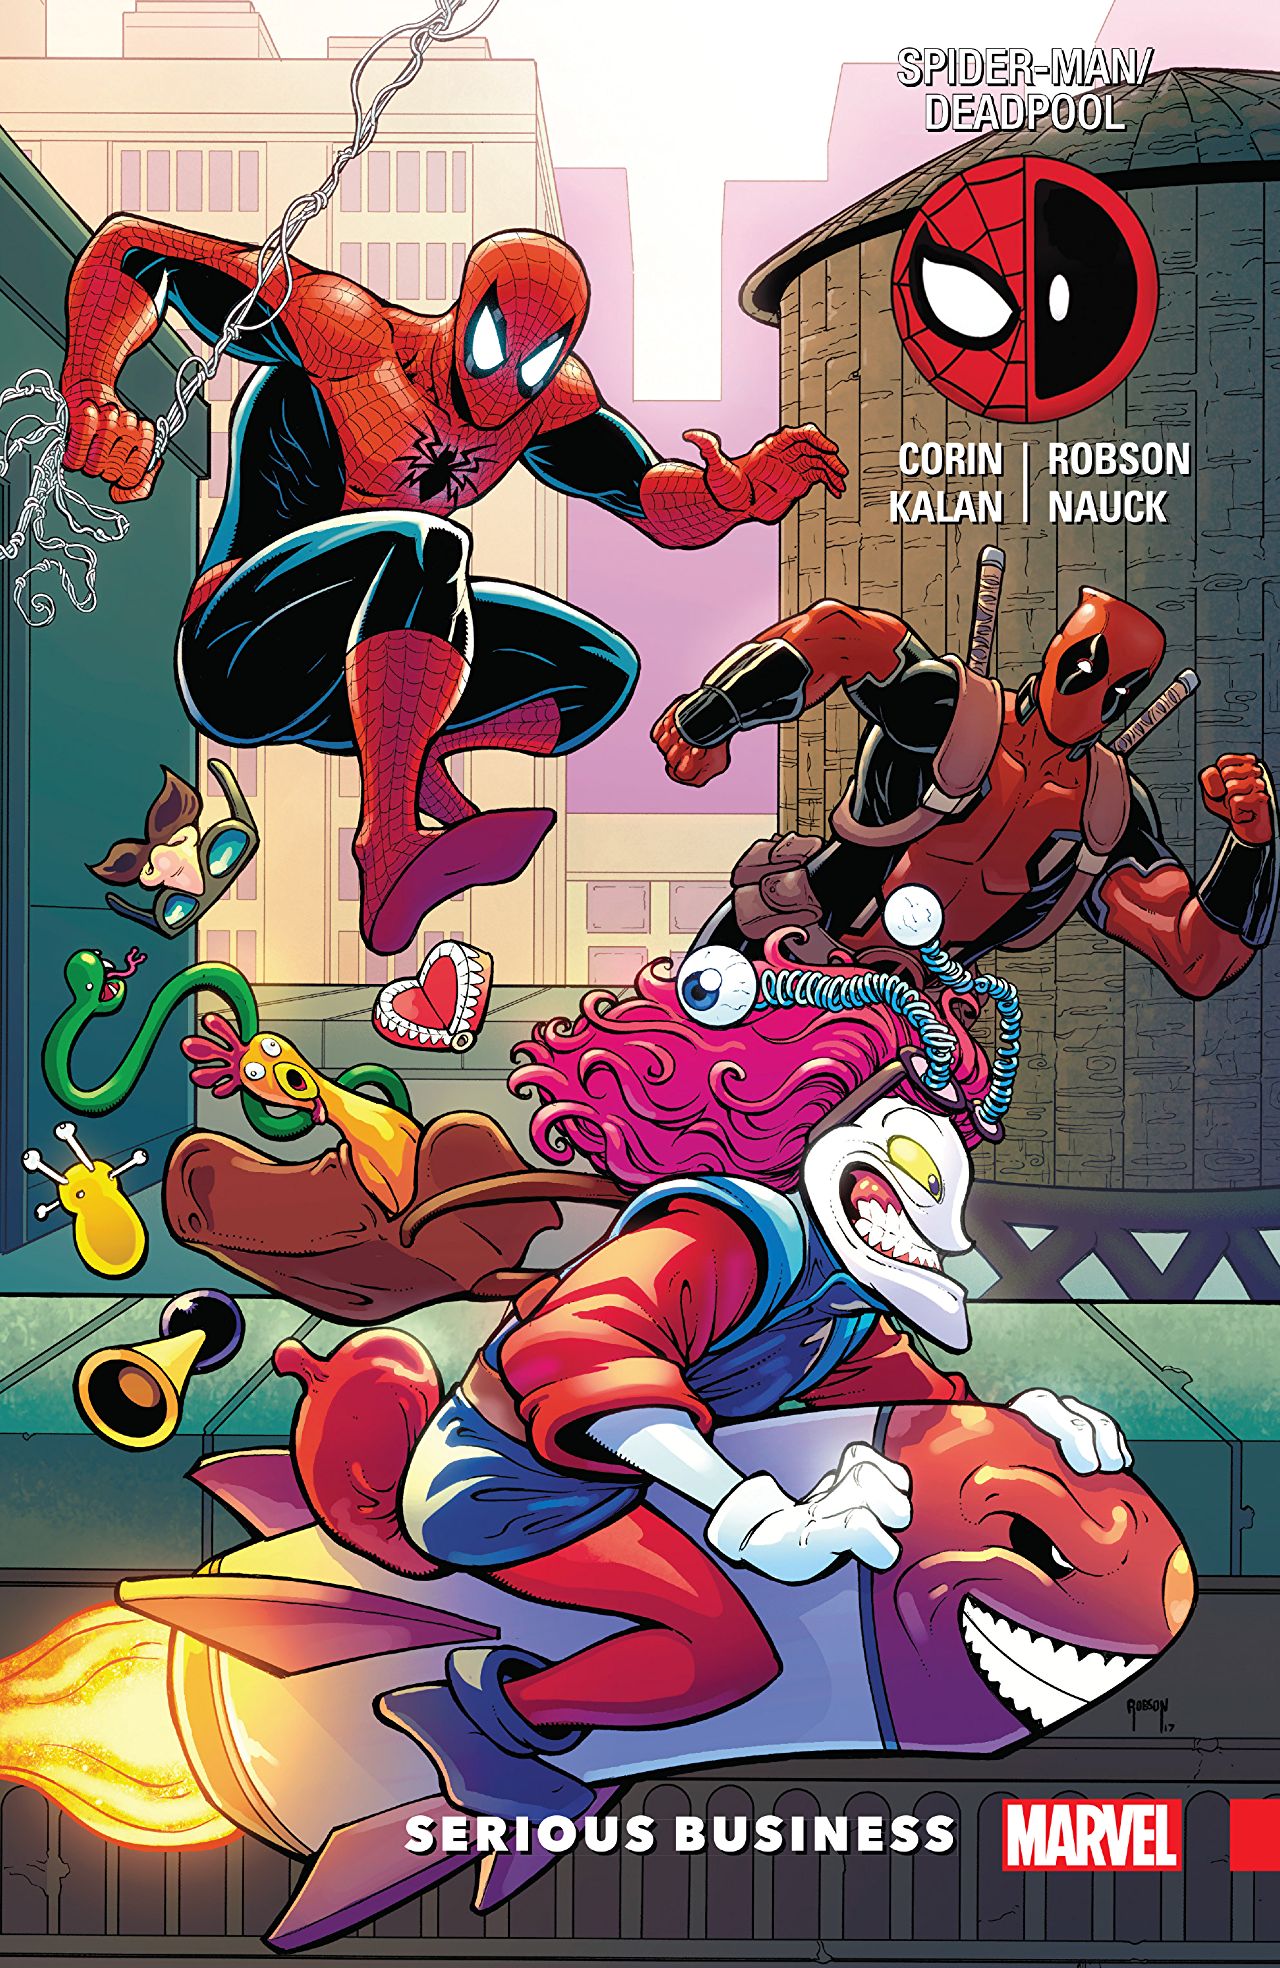 Spider-Man/Deadpool Vol 4: Serious Business review: funny, fast-paced, and light on the deep thinking